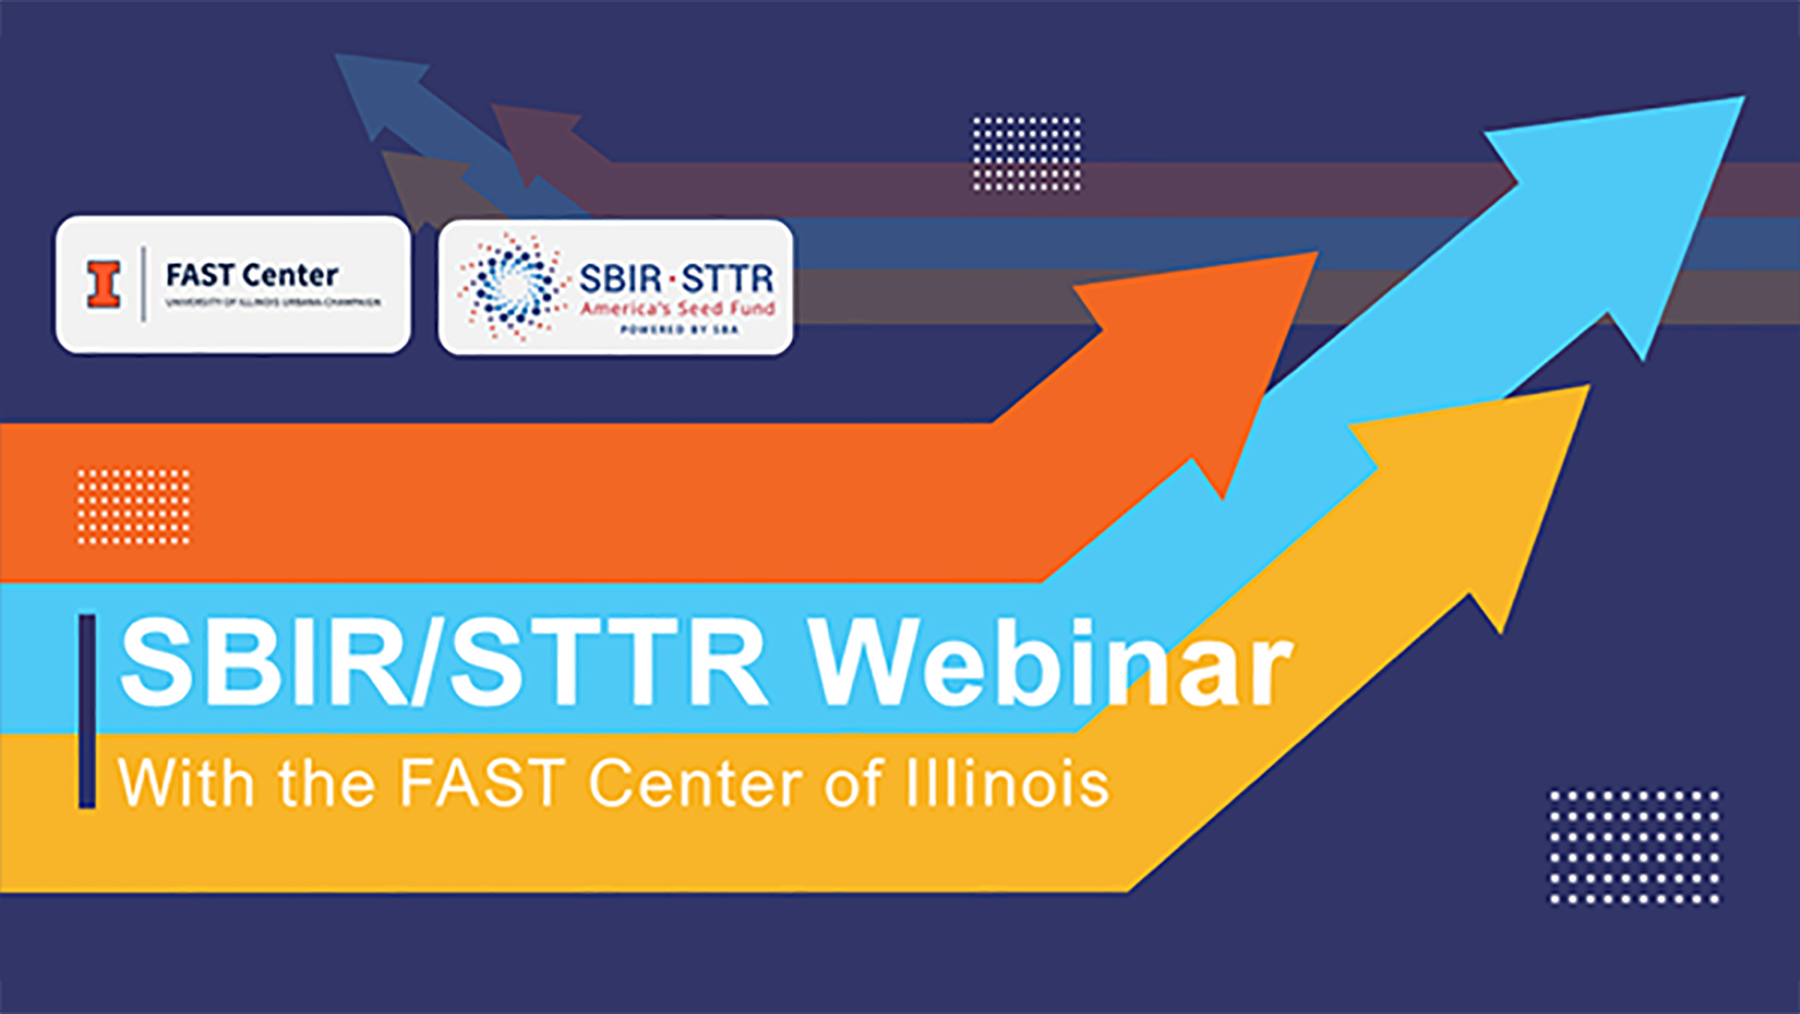 Image includes long, bending arrows (orange, cyan, gold) with text and logo for IL FAST Center. Header Text: SBIR/STTR Webinar. Next line reads With the FAST Center of Illinois.